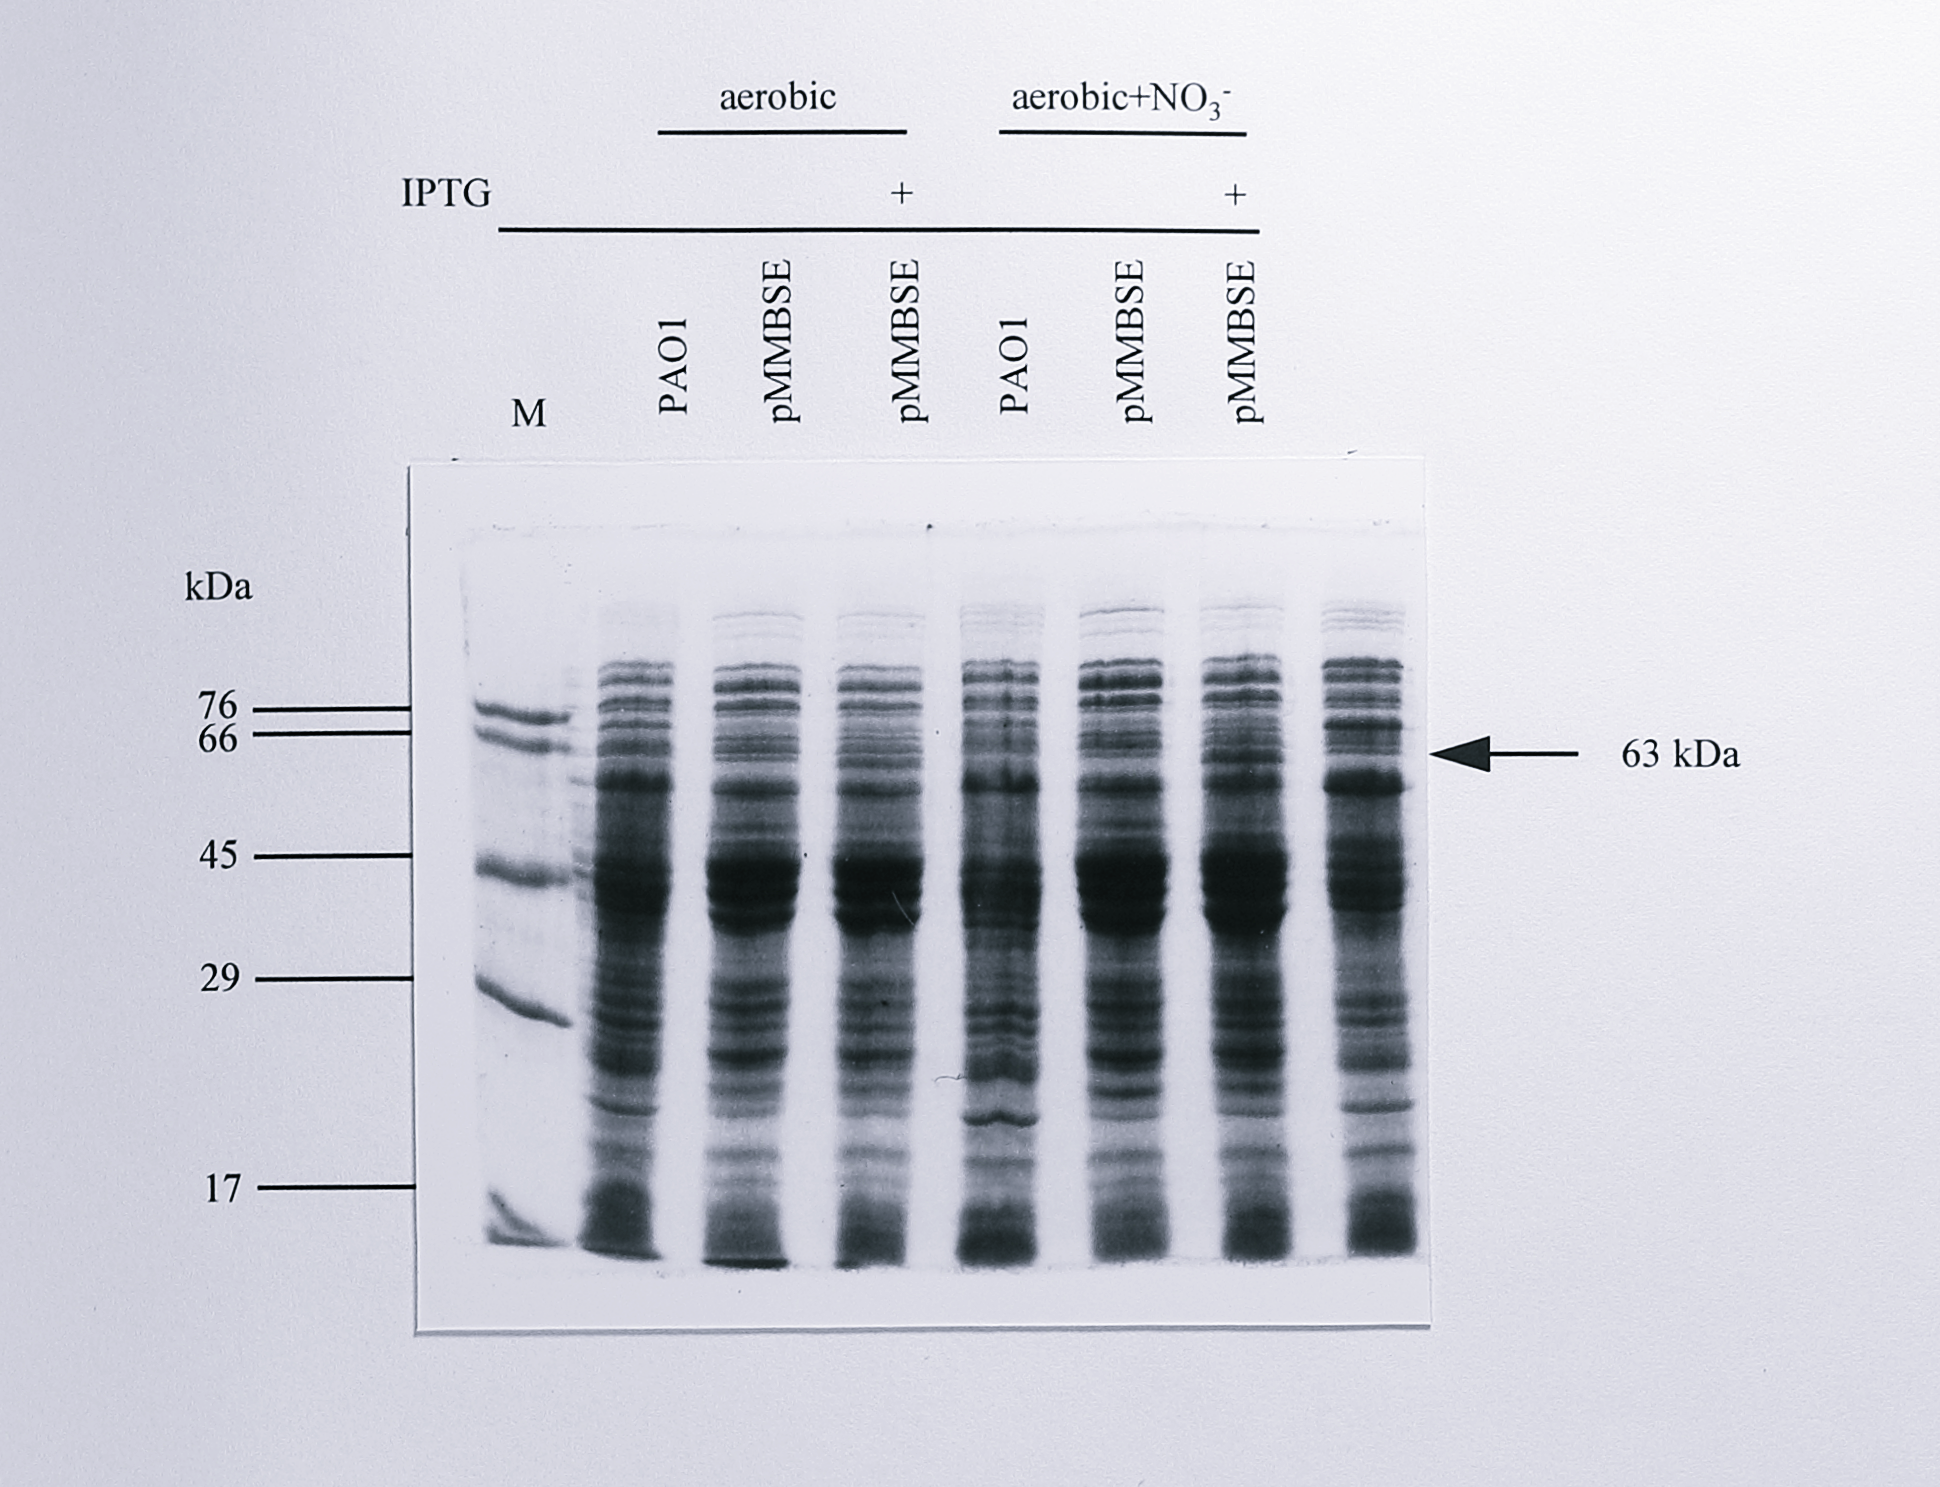 Comparison of the protein content of _Ps. aeruginosa_ with that of _Ps. aeruginosa_ [pMMBSE] under different growth conditions. 40 $\mu$g of protein from the soluble extracts indicated was separated by electrophoresis on an 8% SDS-PAGE gel and stained for protein using Coomassie Brilliant Blue R250. The lane labelled M contained molecular weight markers, the sizes of which are indicated at the left of the gel. A 63 kDa band, corresponding to expressed _T. pantotropha_ cytochrome _cd_$_1$ is visible in lanes 4 and 7.